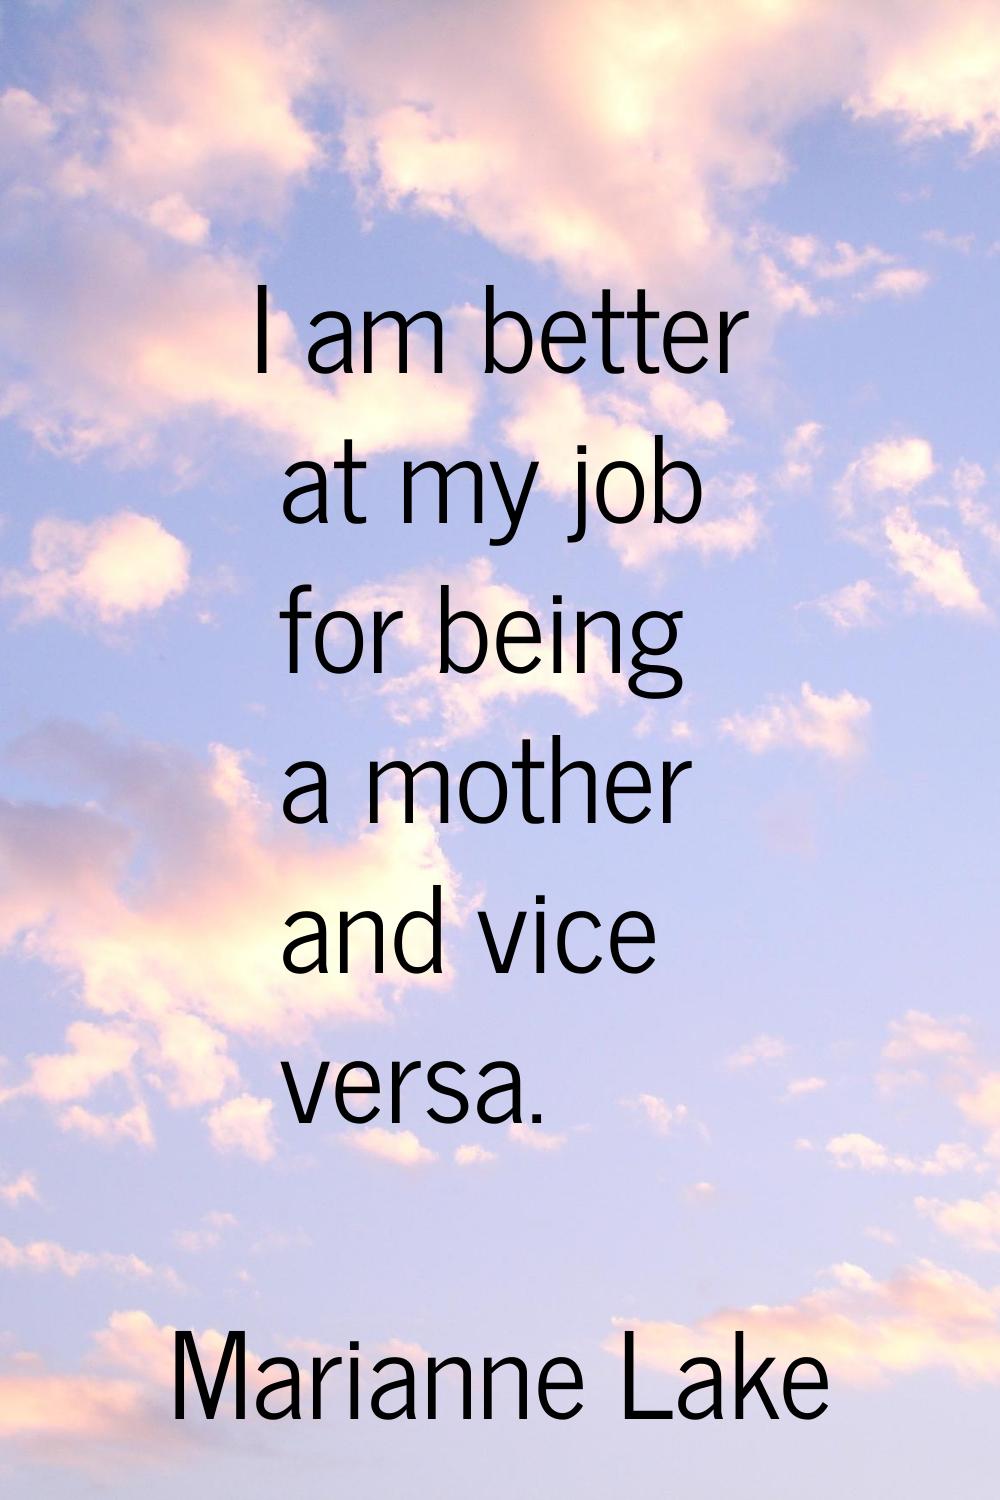 I am better at my job for being a mother and vice versa.